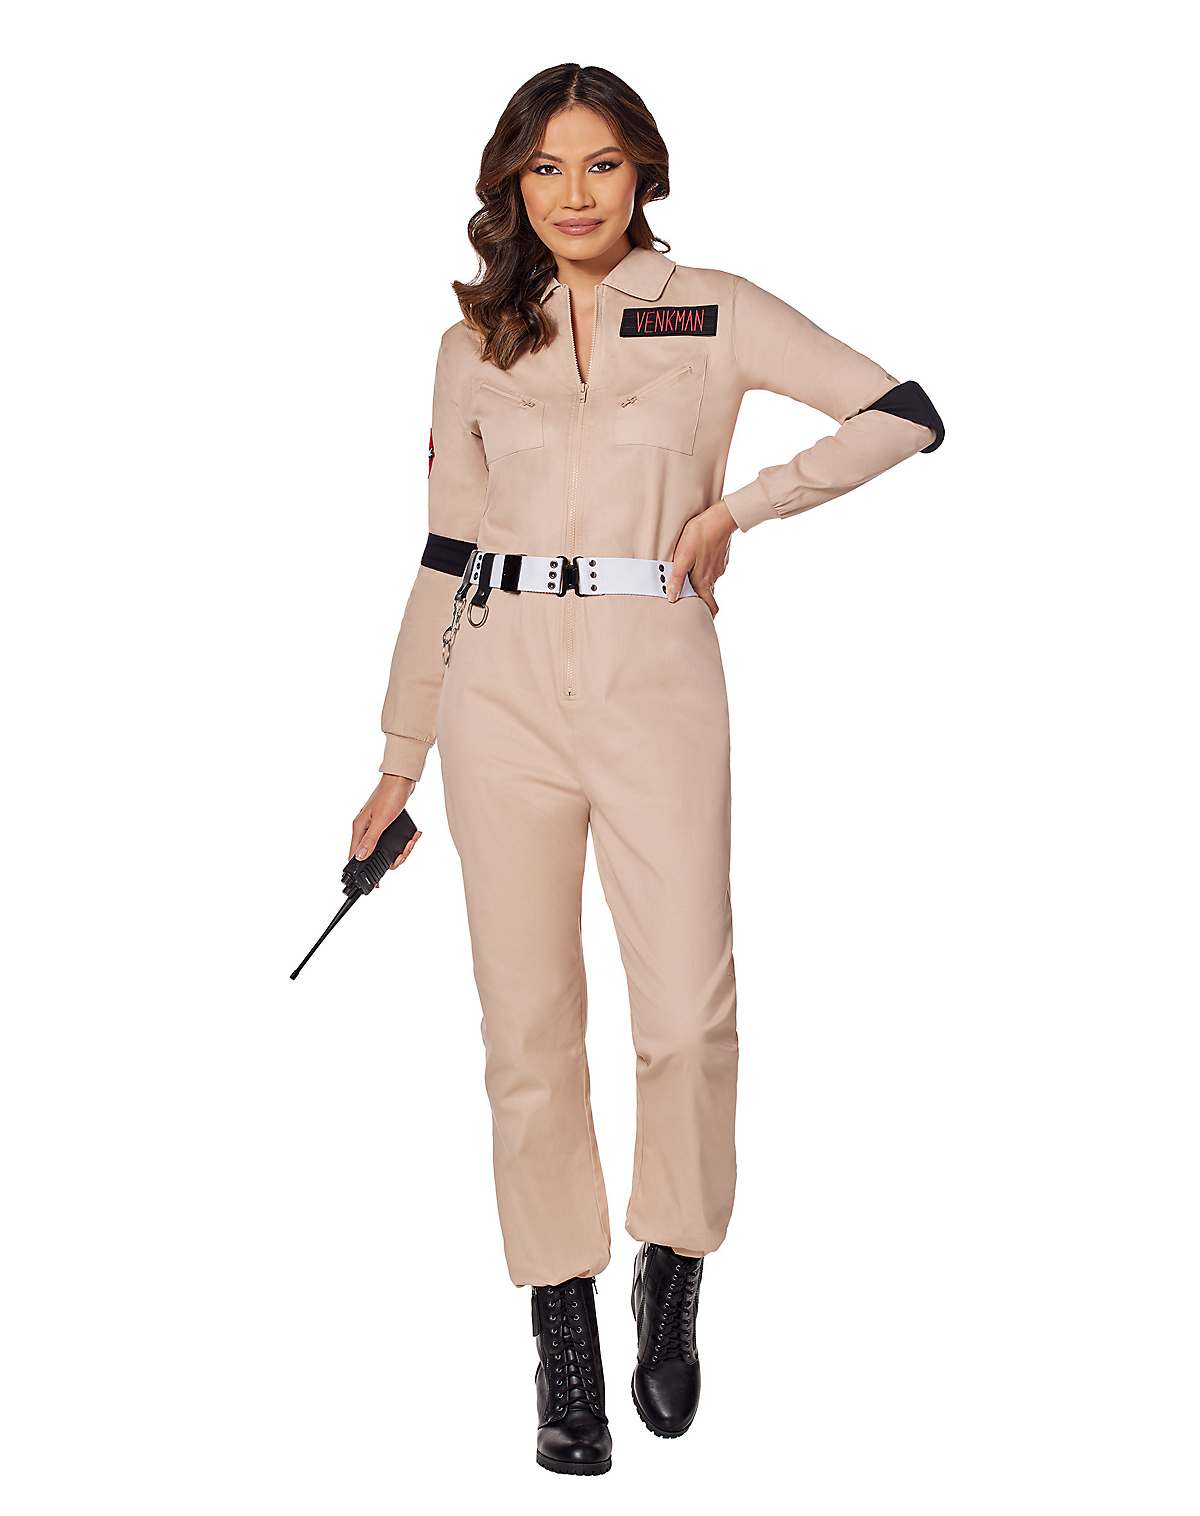 Adult Ghostbusters One Piece Costume - Ghostbusters Classic